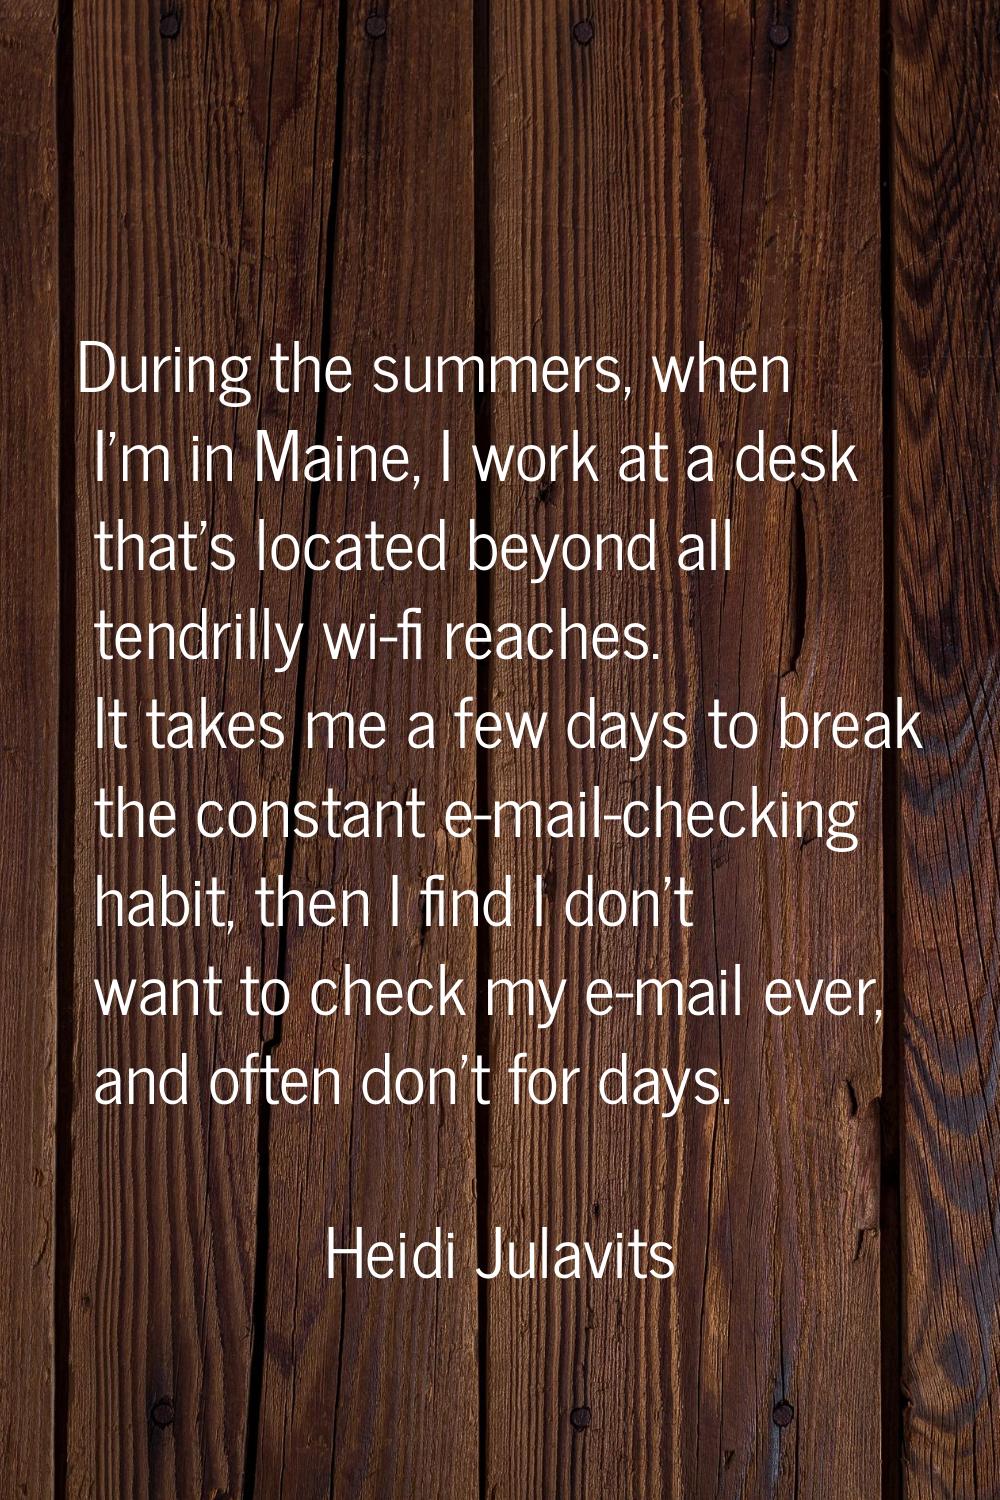 During the summers, when I'm in Maine, I work at a desk that's located beyond all tendrilly wi-fi r